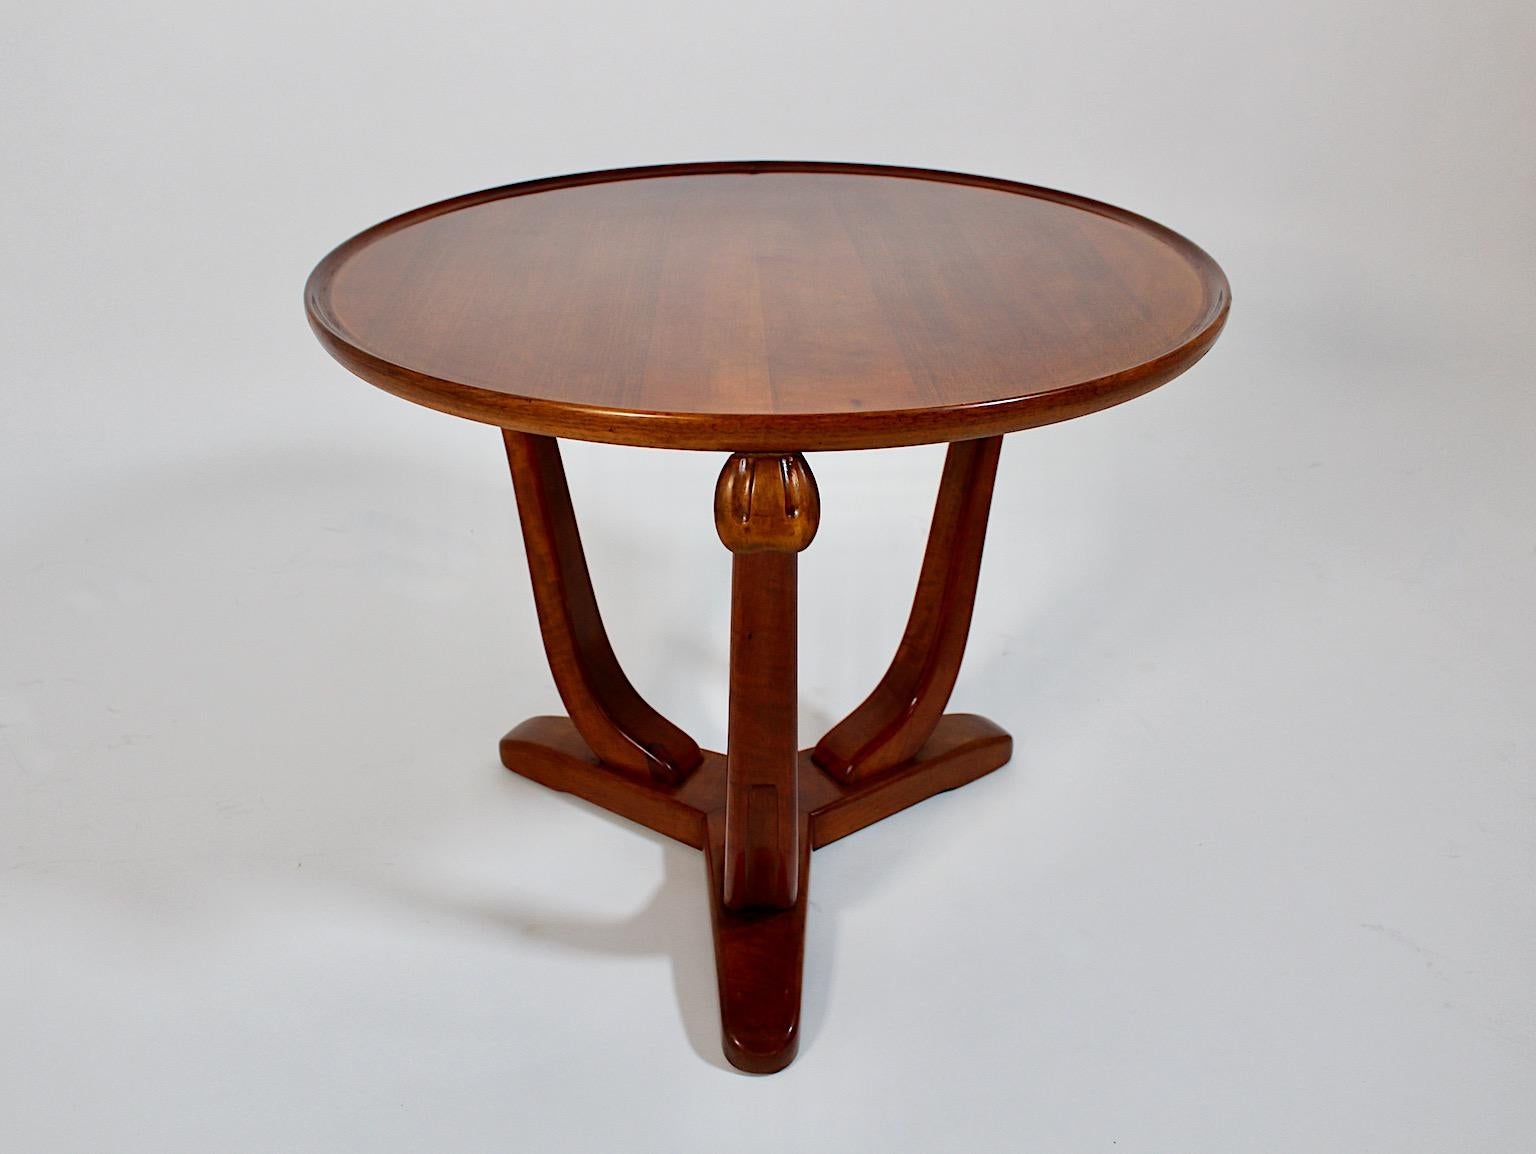 Art Deco vintage circular organic side table from walnut, 1930s, France.
An amazing side table from solid walnut circular like with three slightly curved feet and carved details.
While the feet ends at an organic shaped base, the circular plate